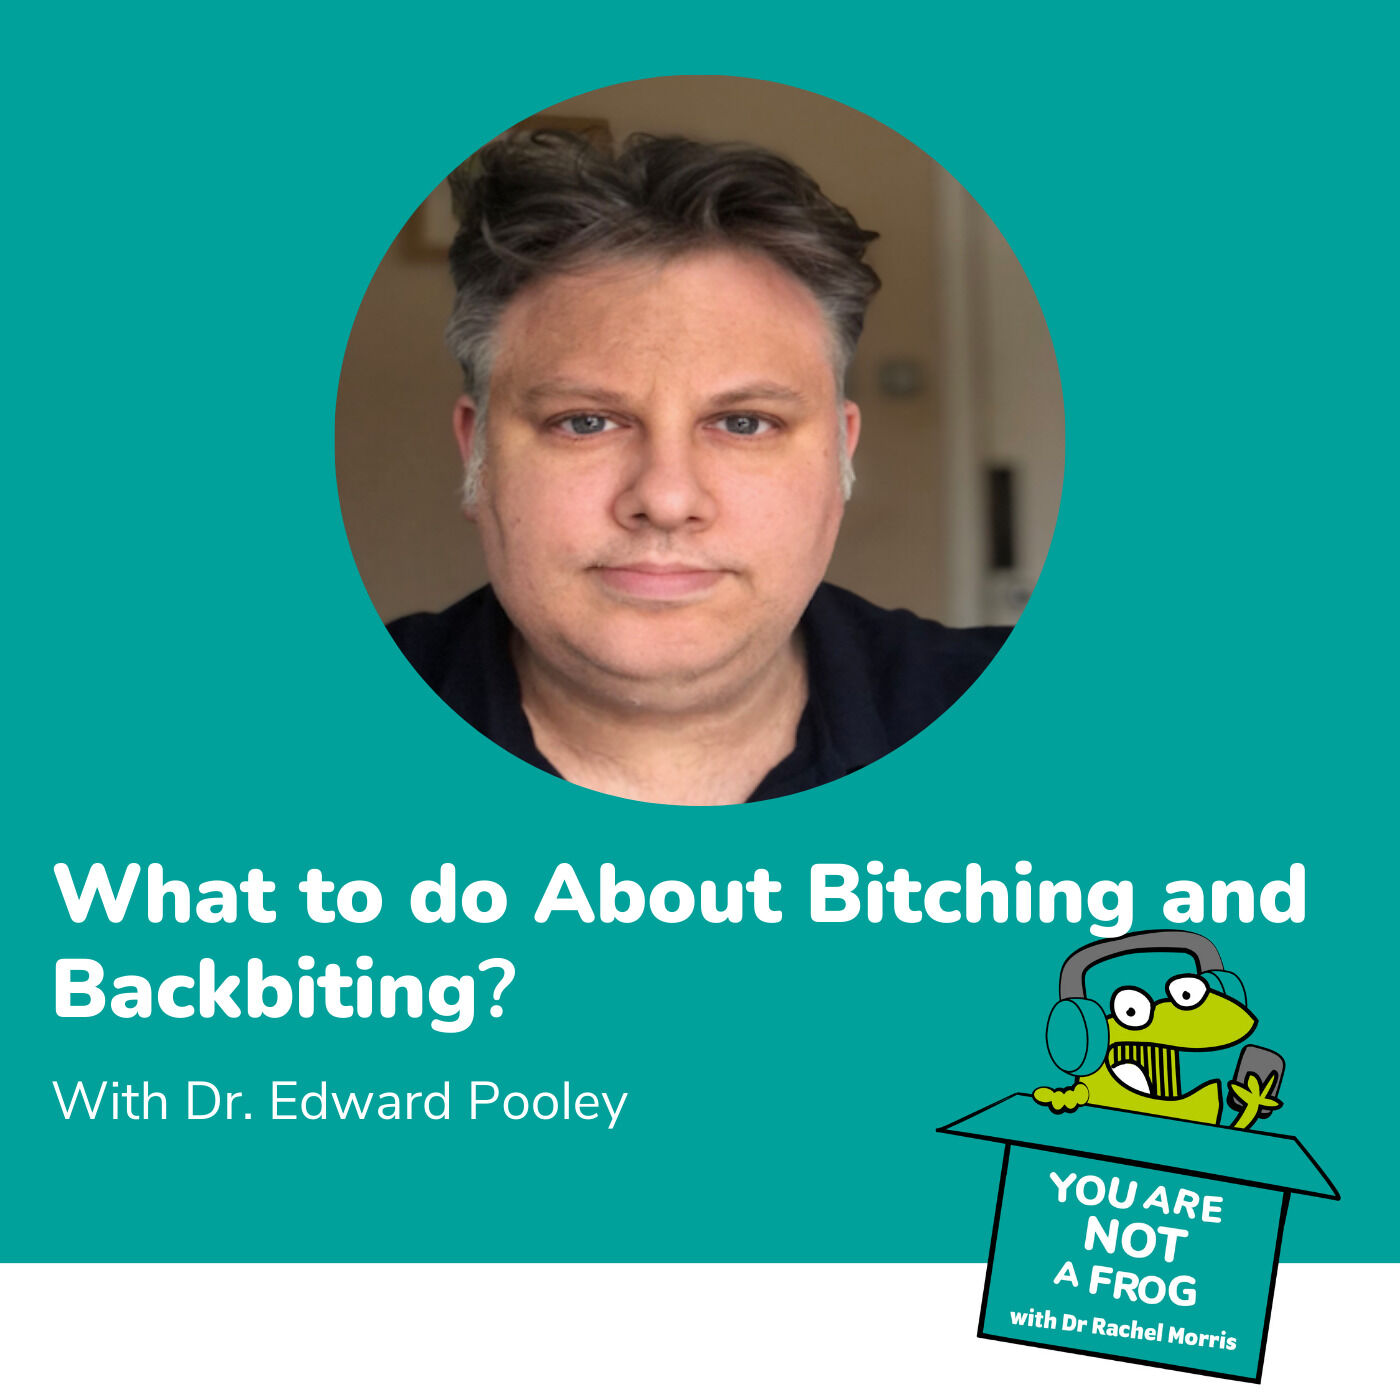 What to Do About Bitching and Backbiting with Dr Edward Pooley